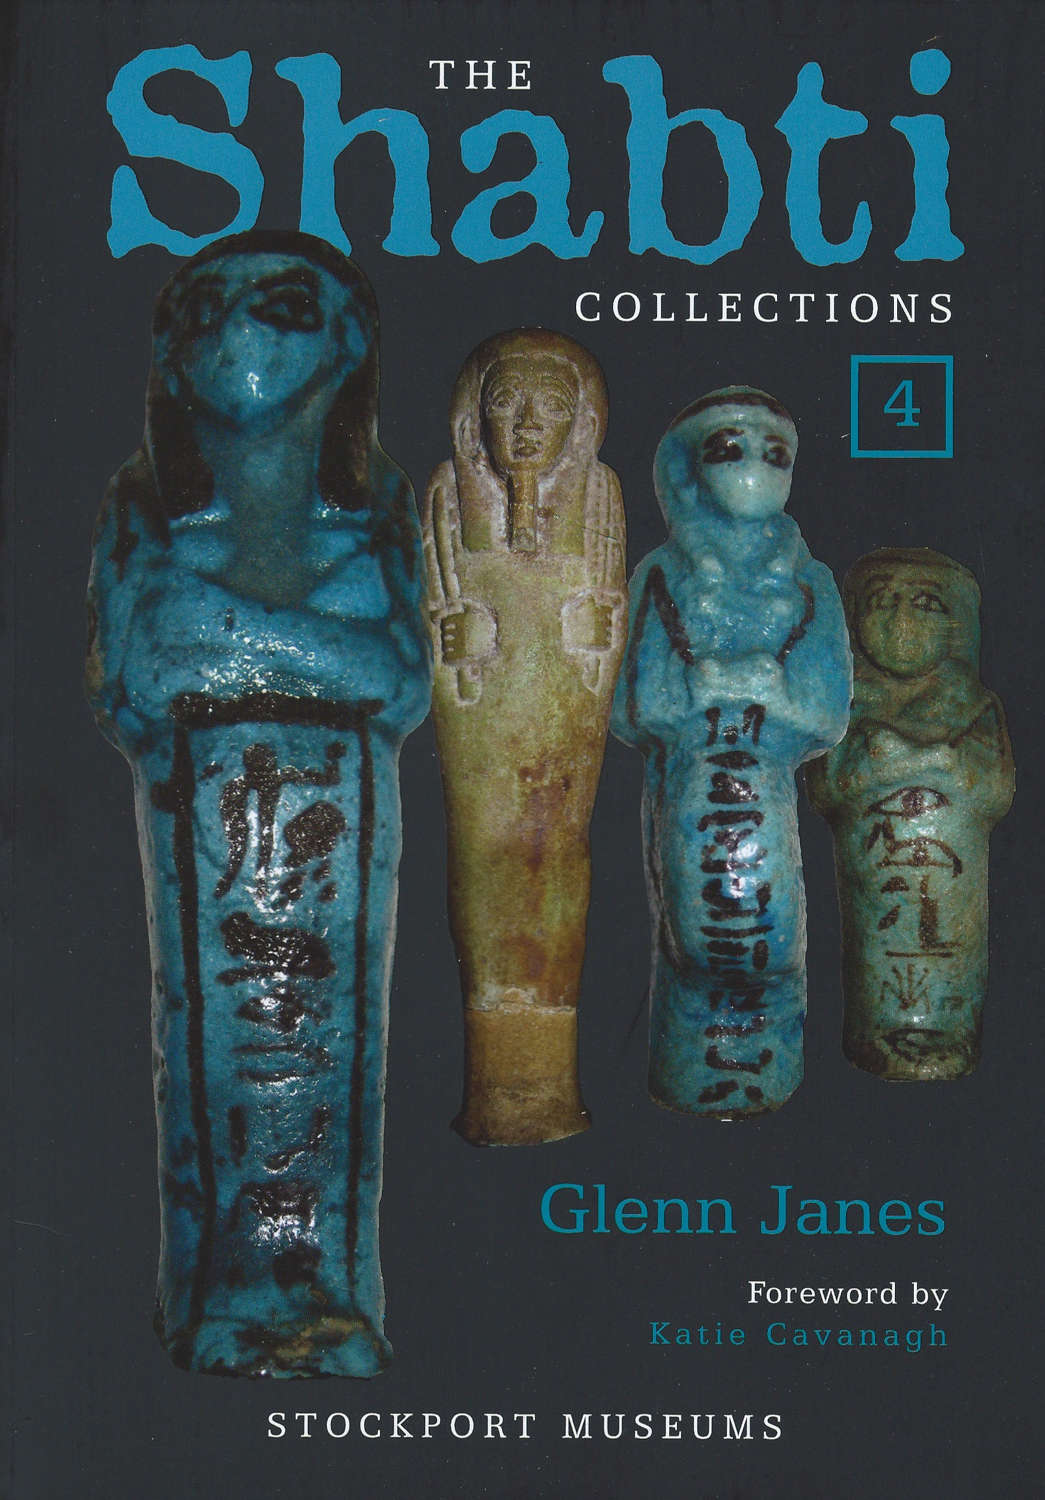 The Shabti Collections Volume 4 – Stockport Museums